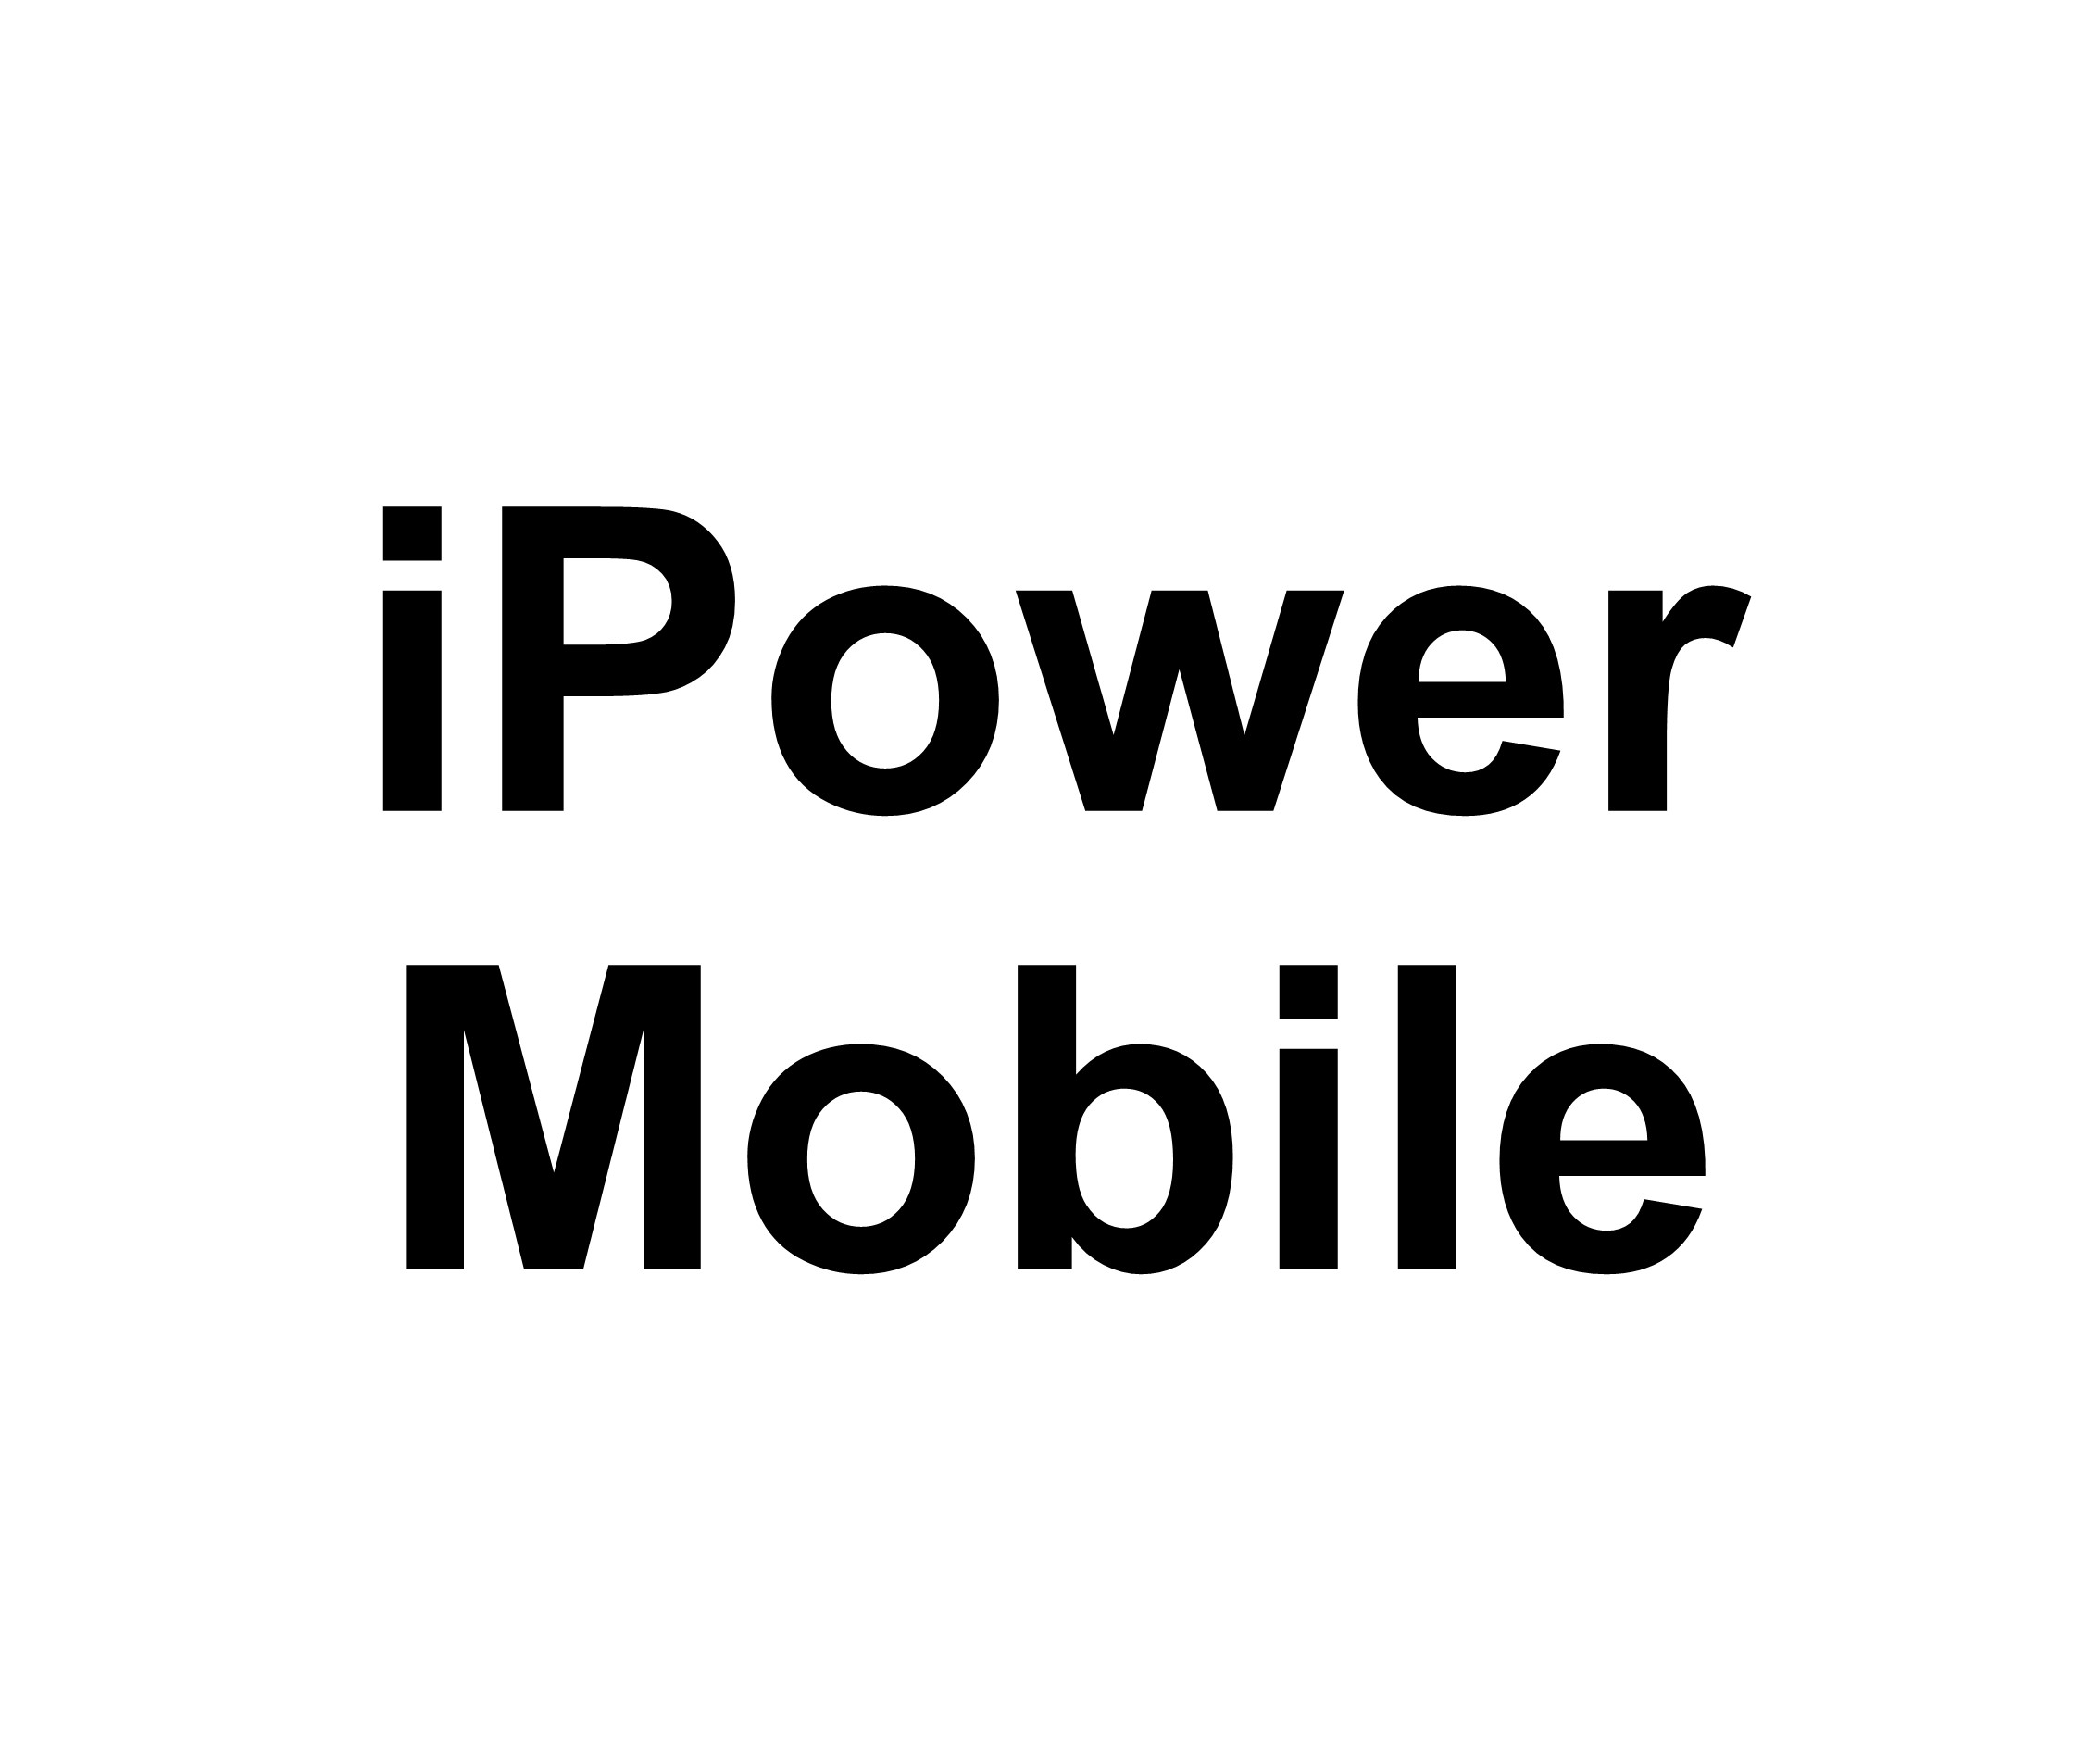 iPower Mobile